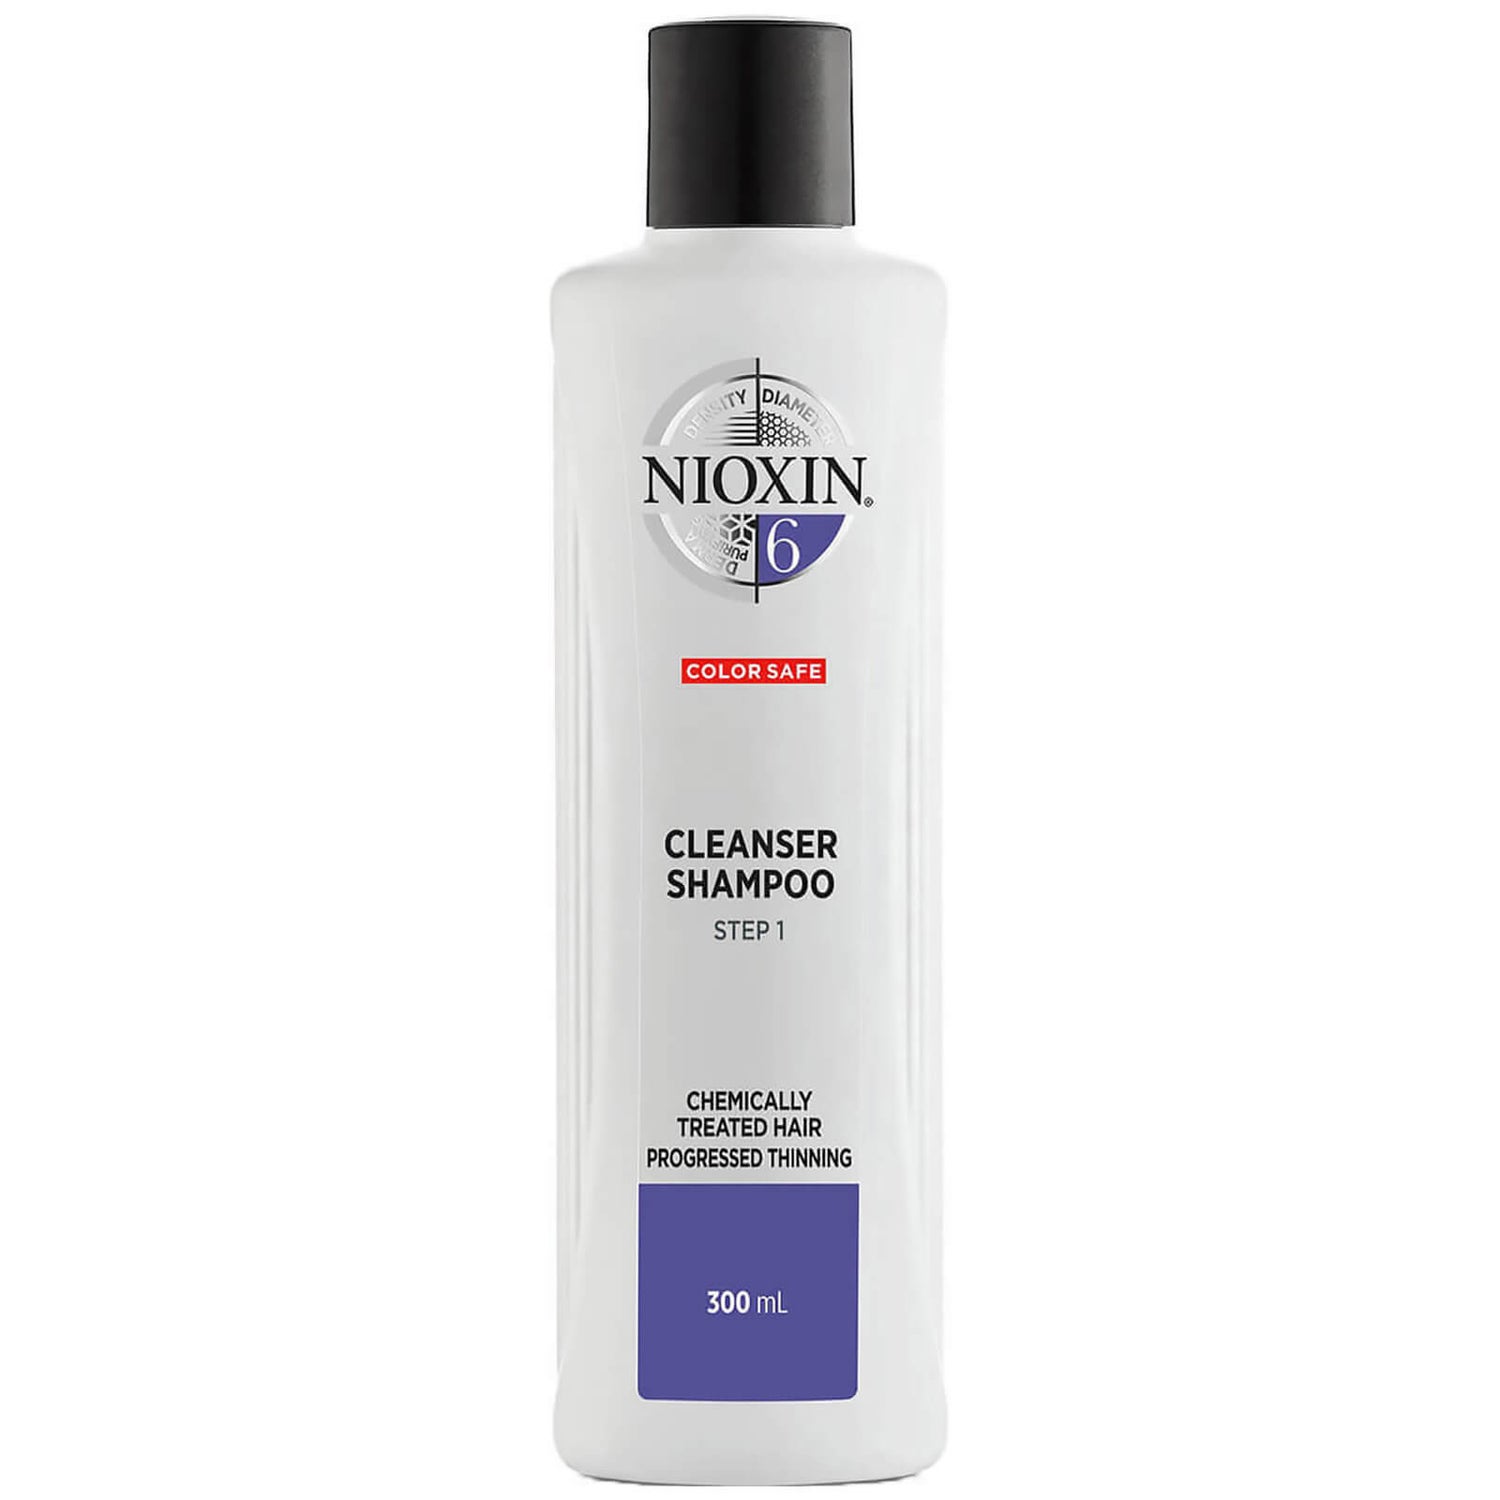 NIOXIN 3-Part System 6 Cleanser Shampoo for Chemically Treated Hair with Progressed Thinning 300 ml